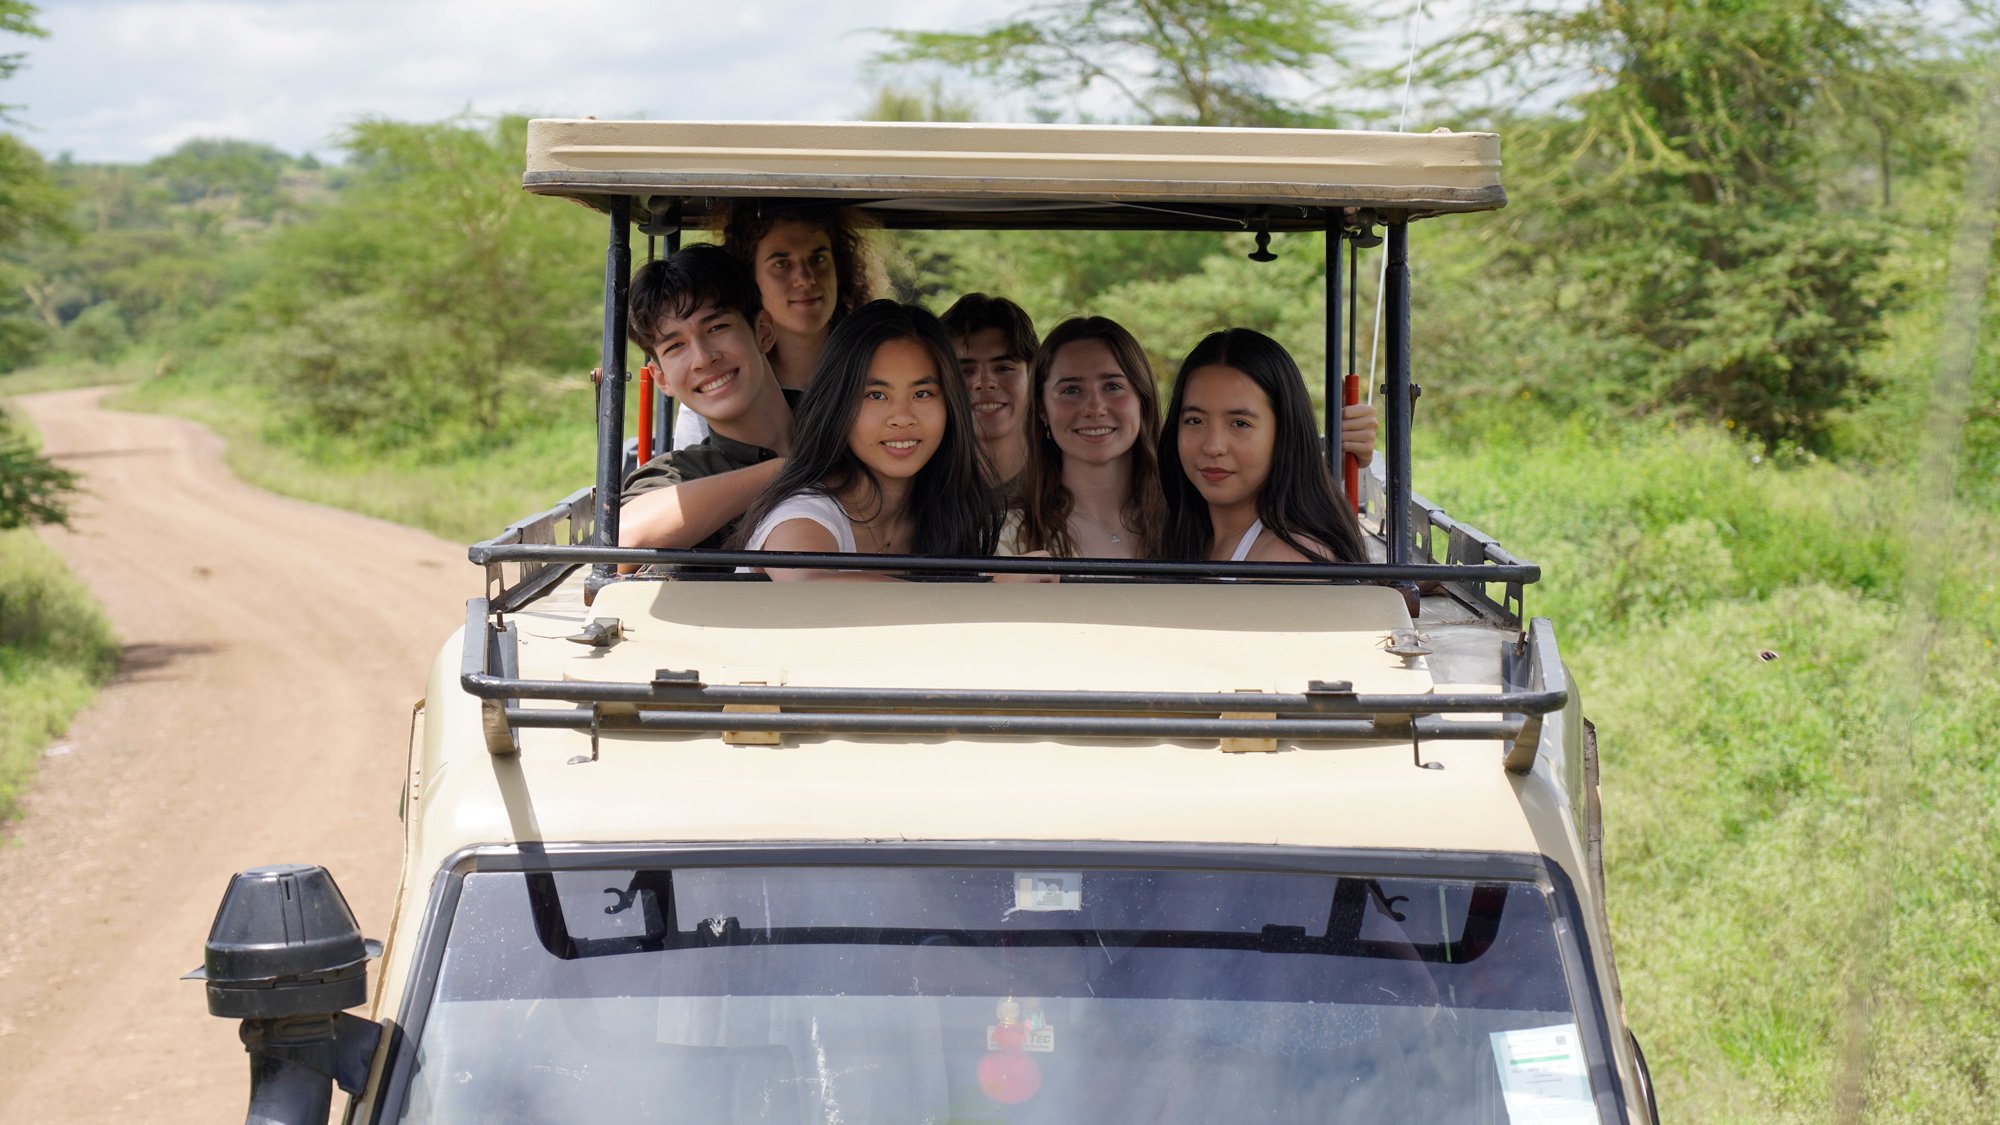 The six juniors from INTL standing out of the top of the game viewing vehicle during their safari.